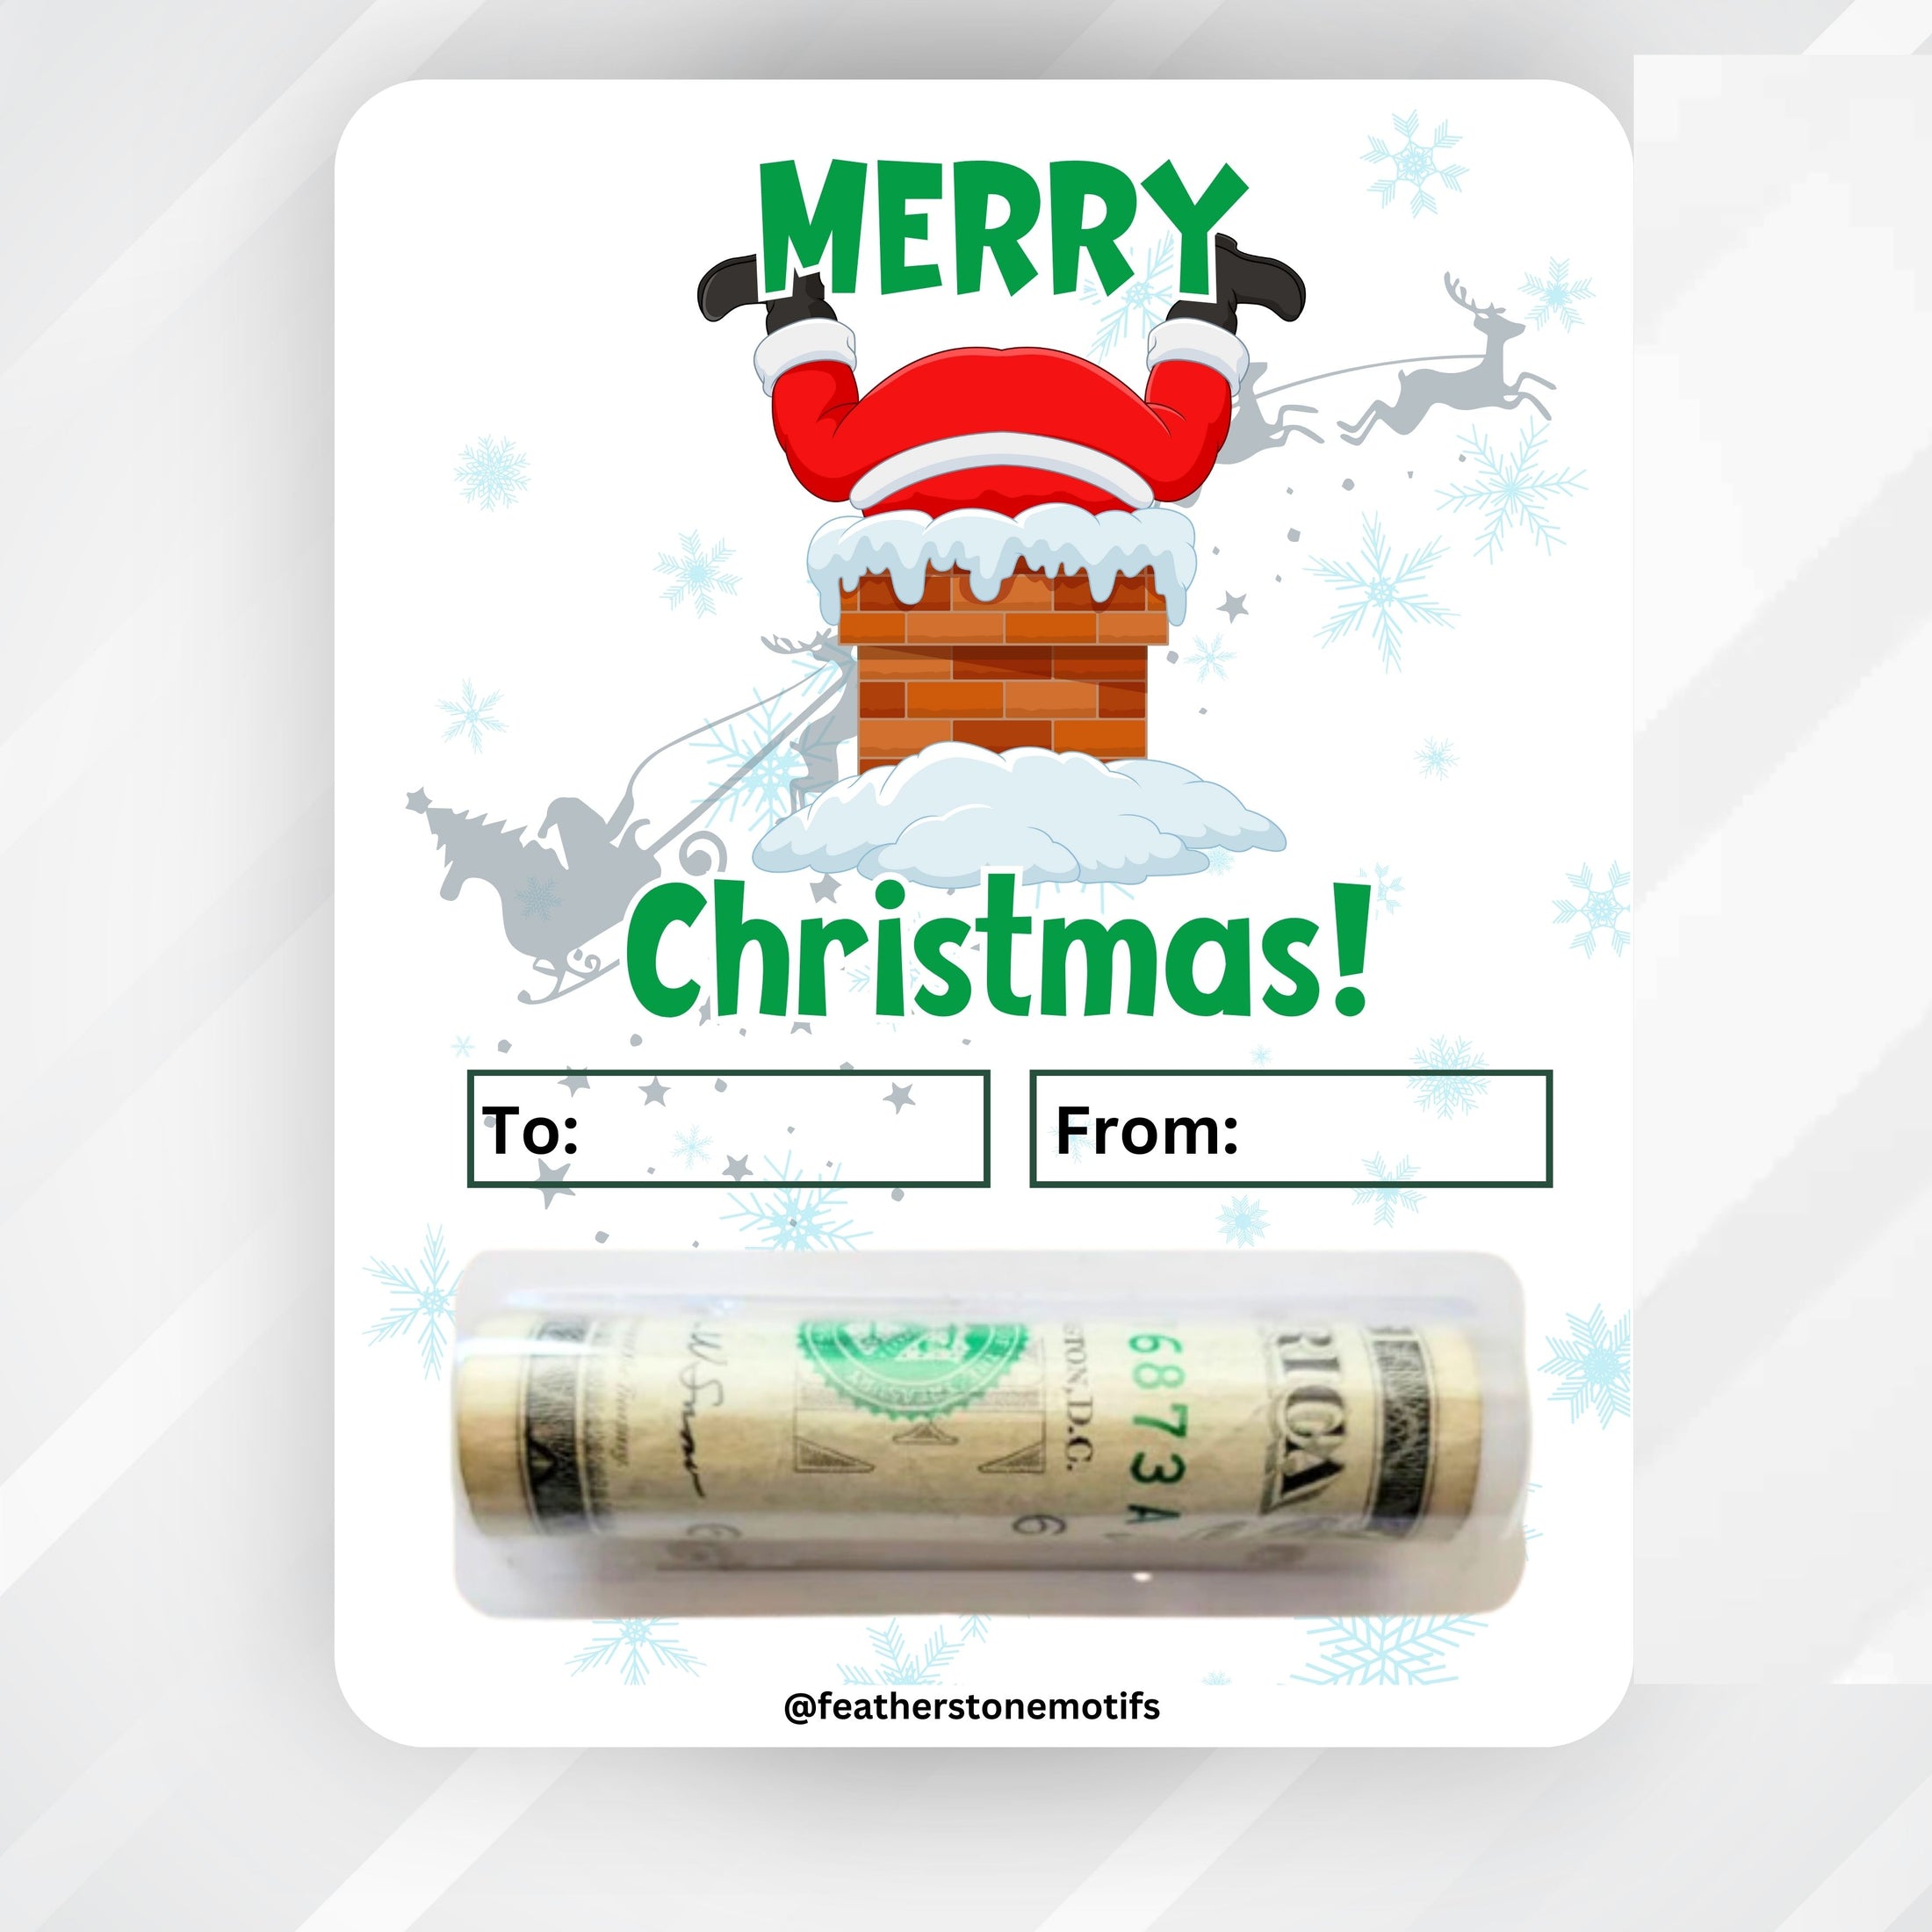 This image shows the money tube attached to the Santa Chimney Money Card.